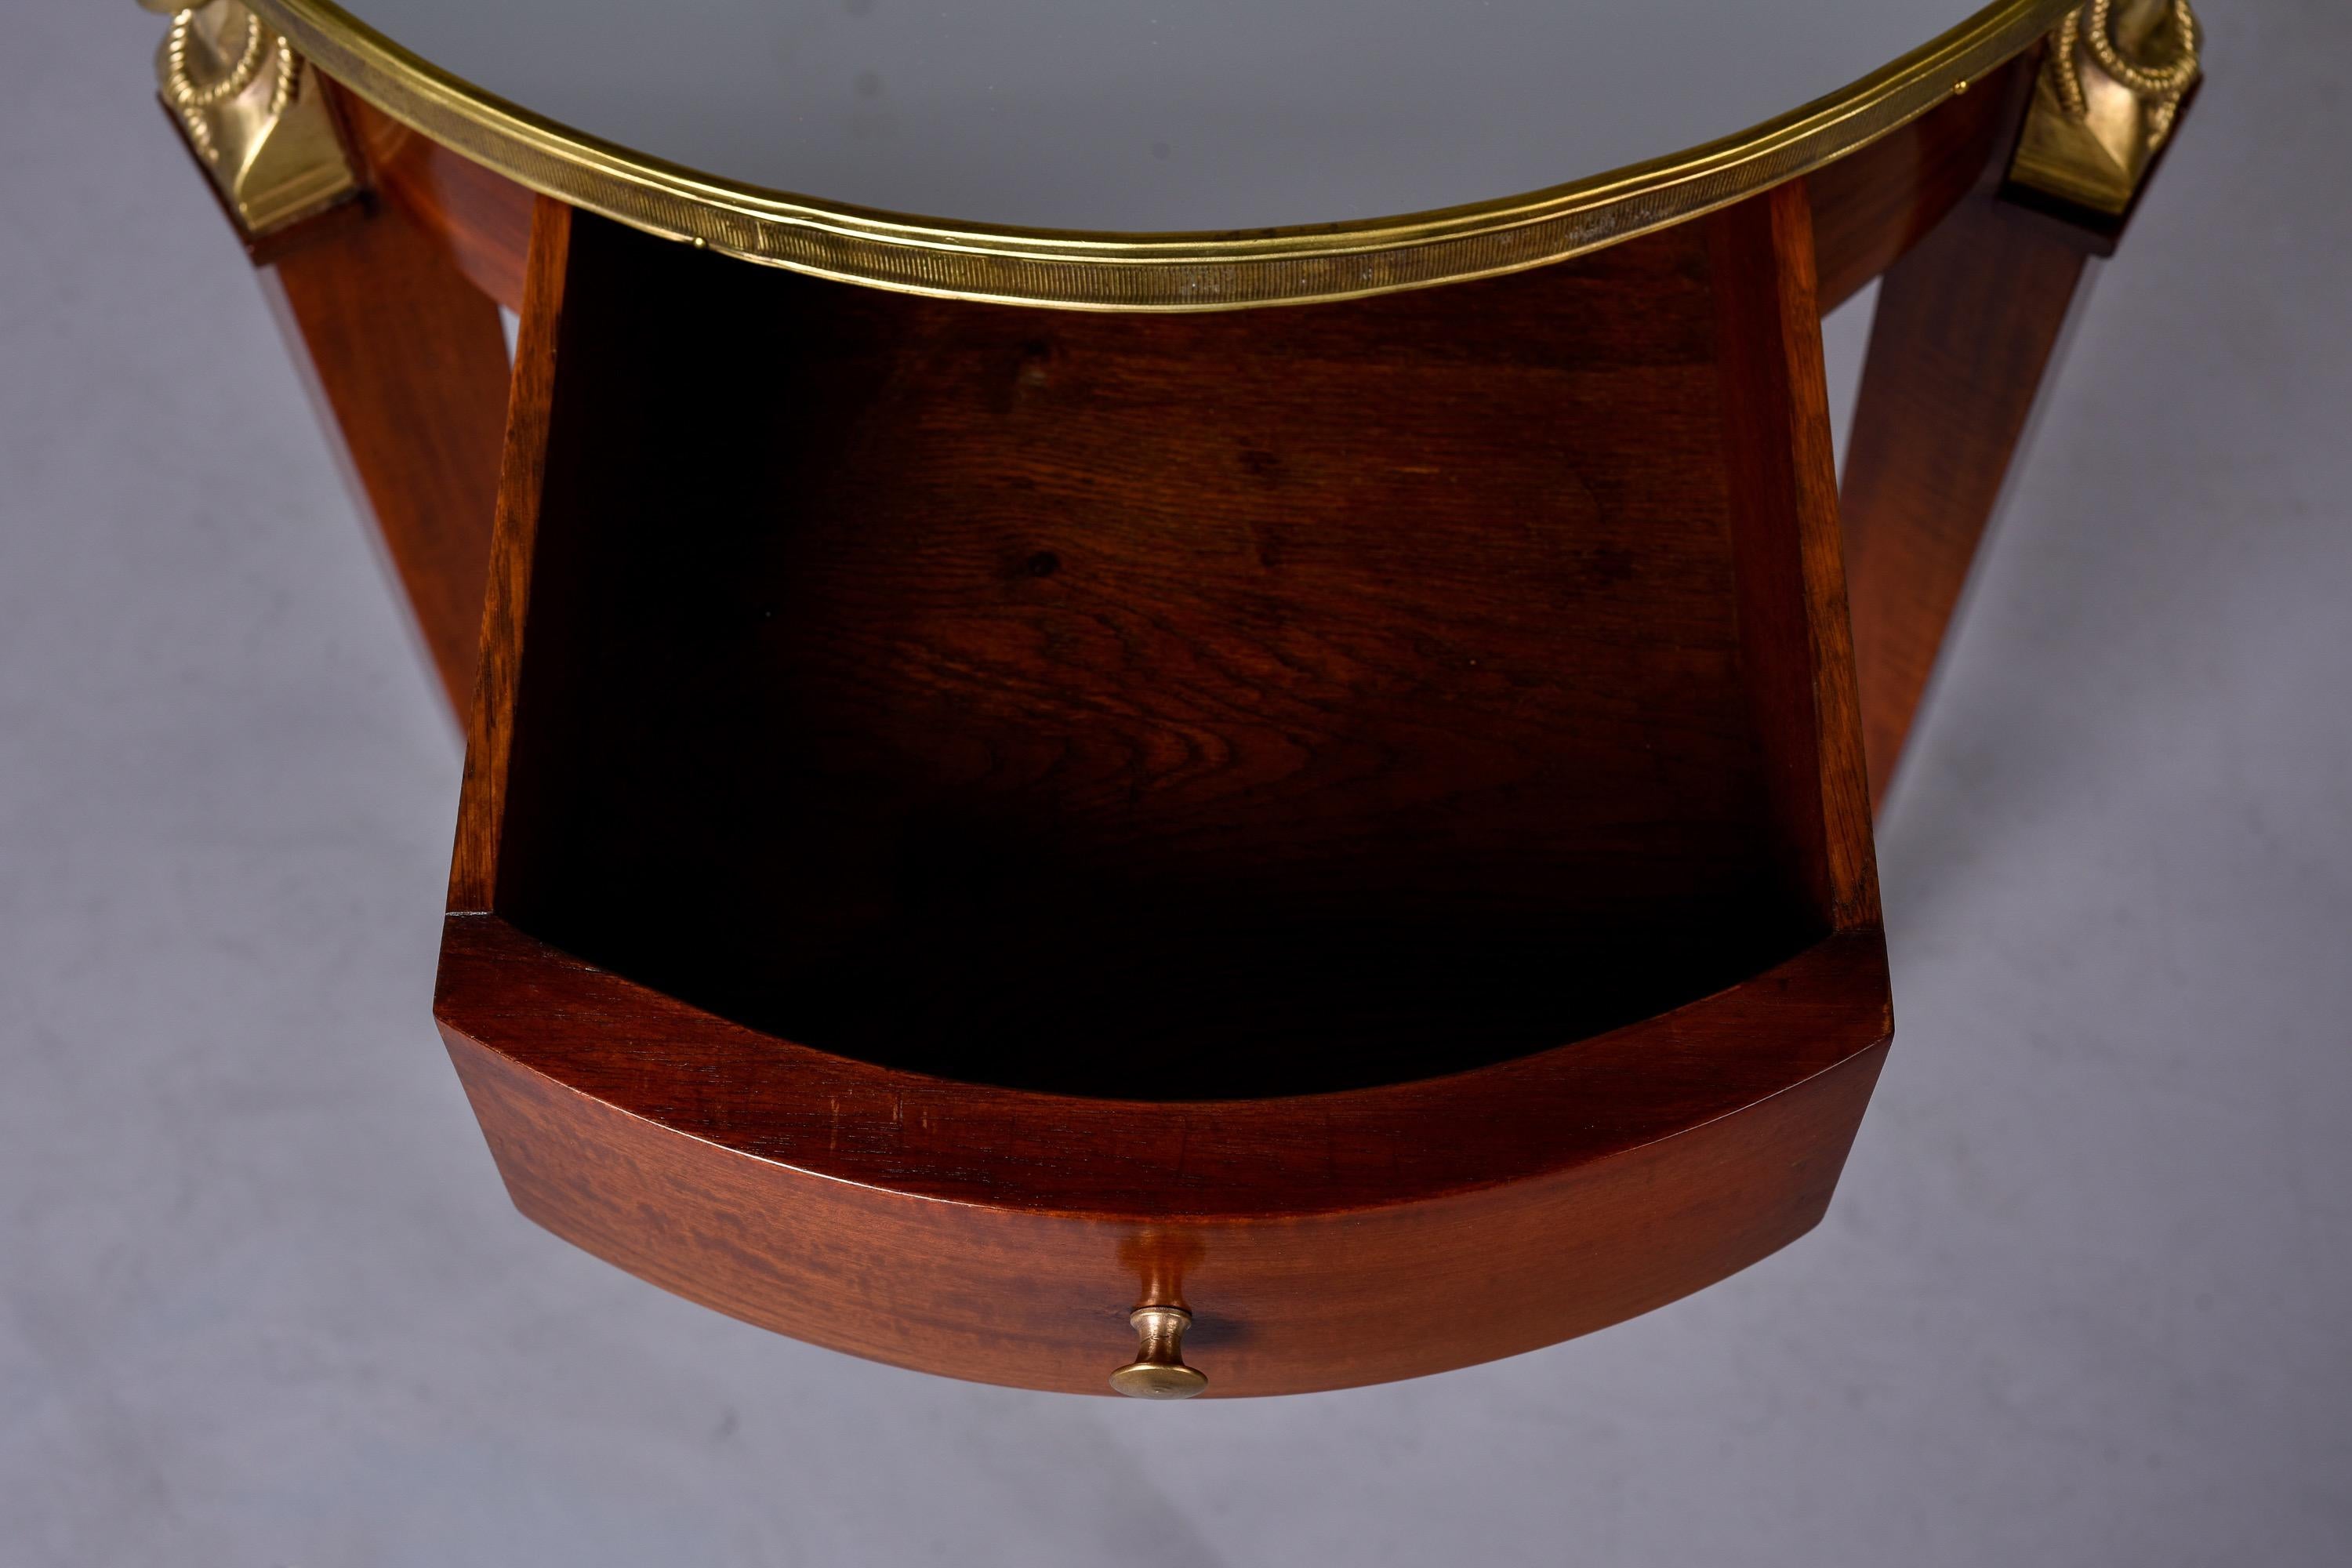 20th Century Empire Style Round Side Table with Mirrored Top and Brass Mounts